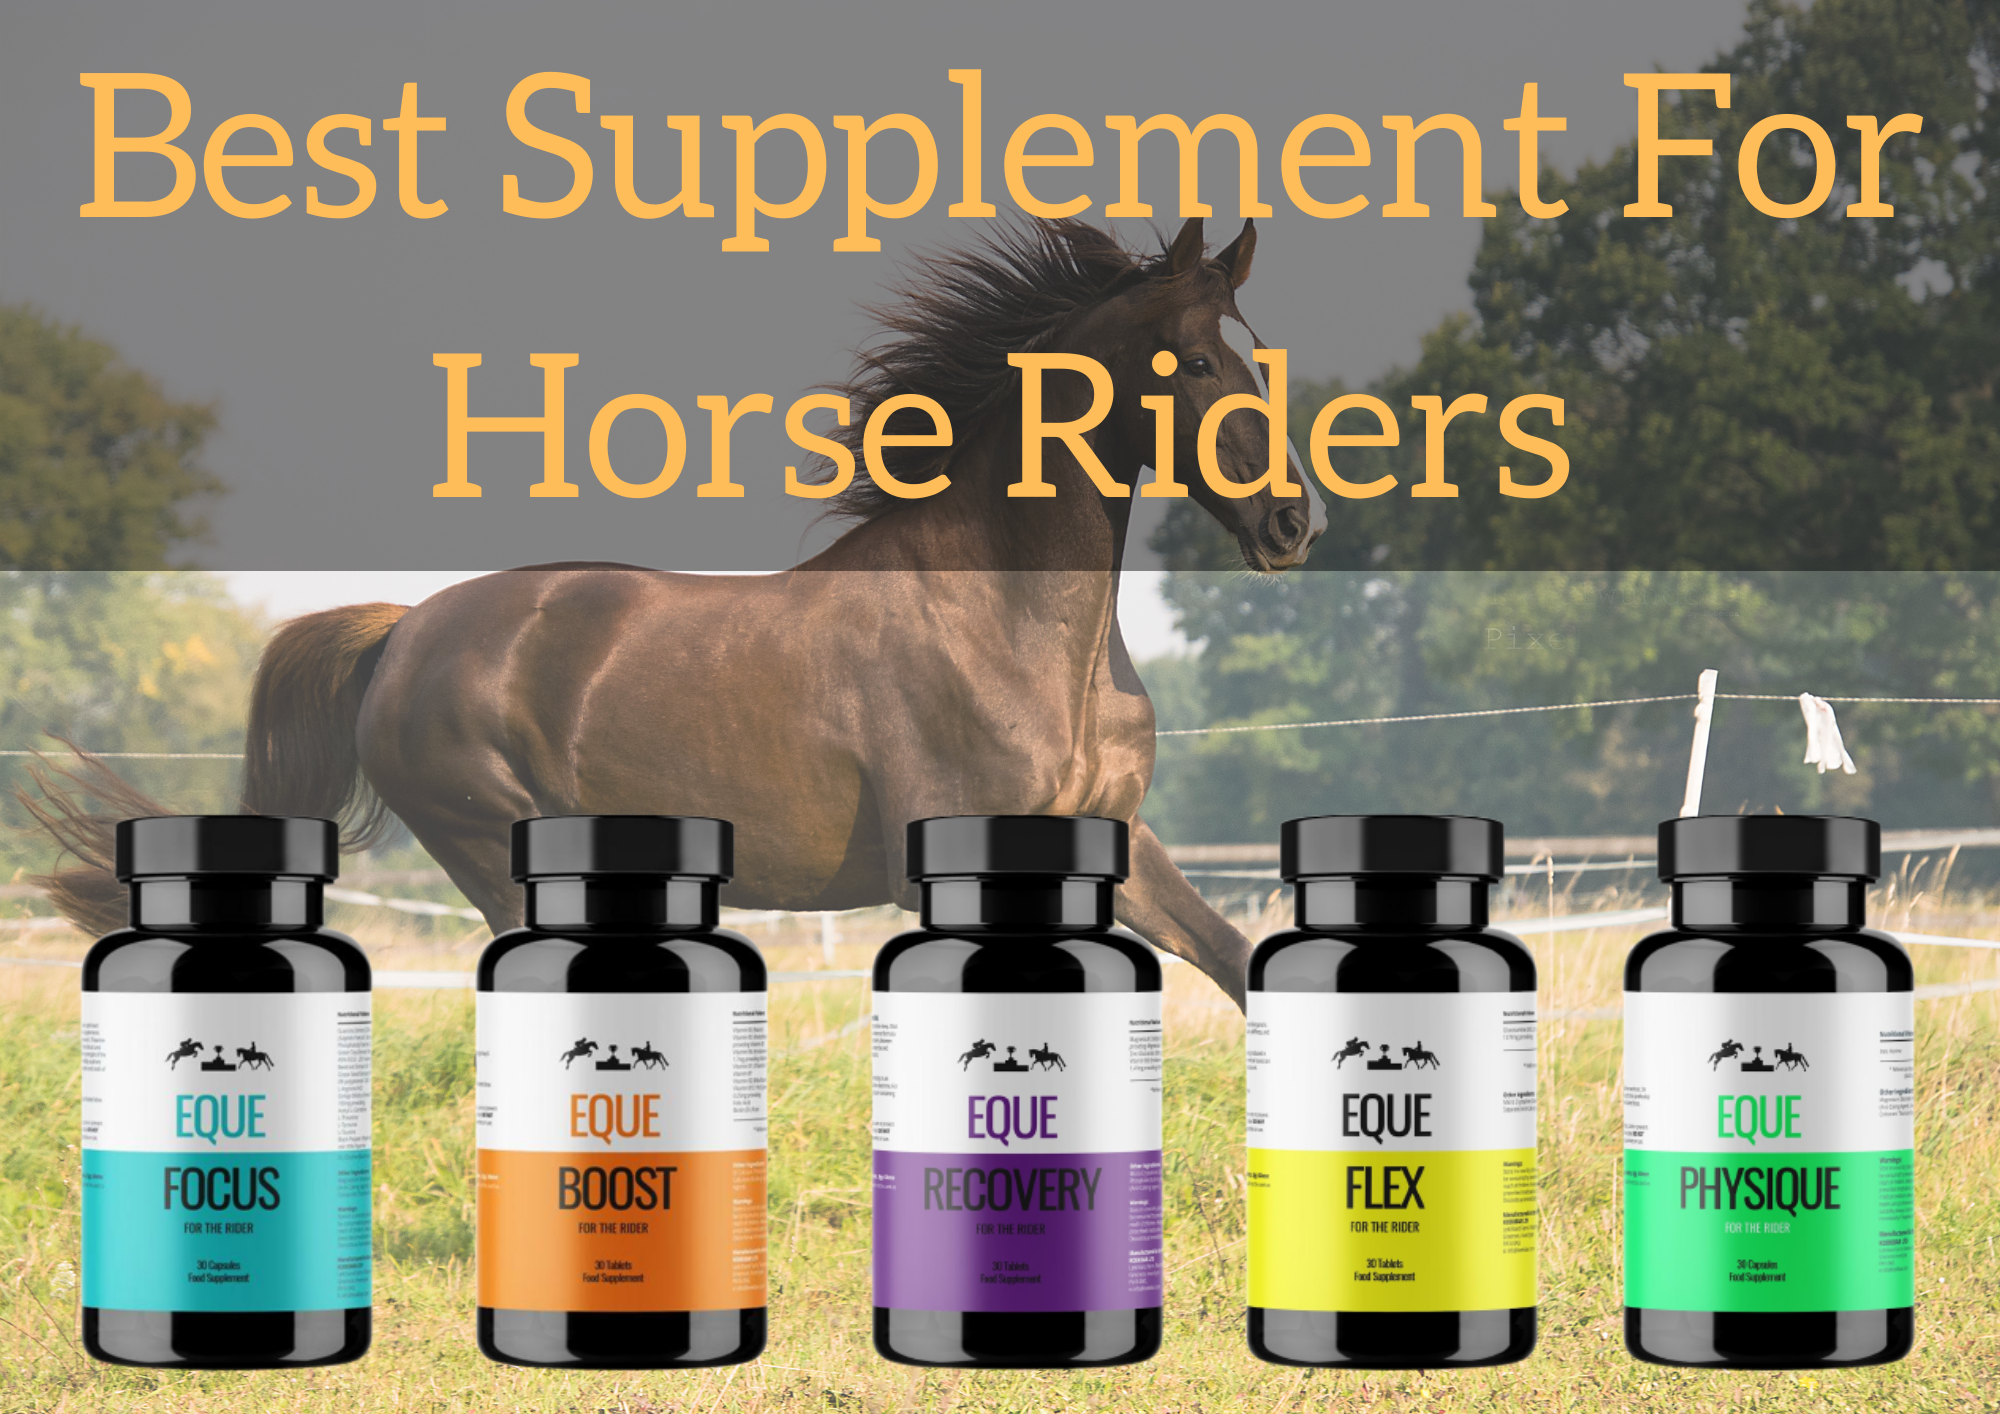 Best Supplement For Horse Riders